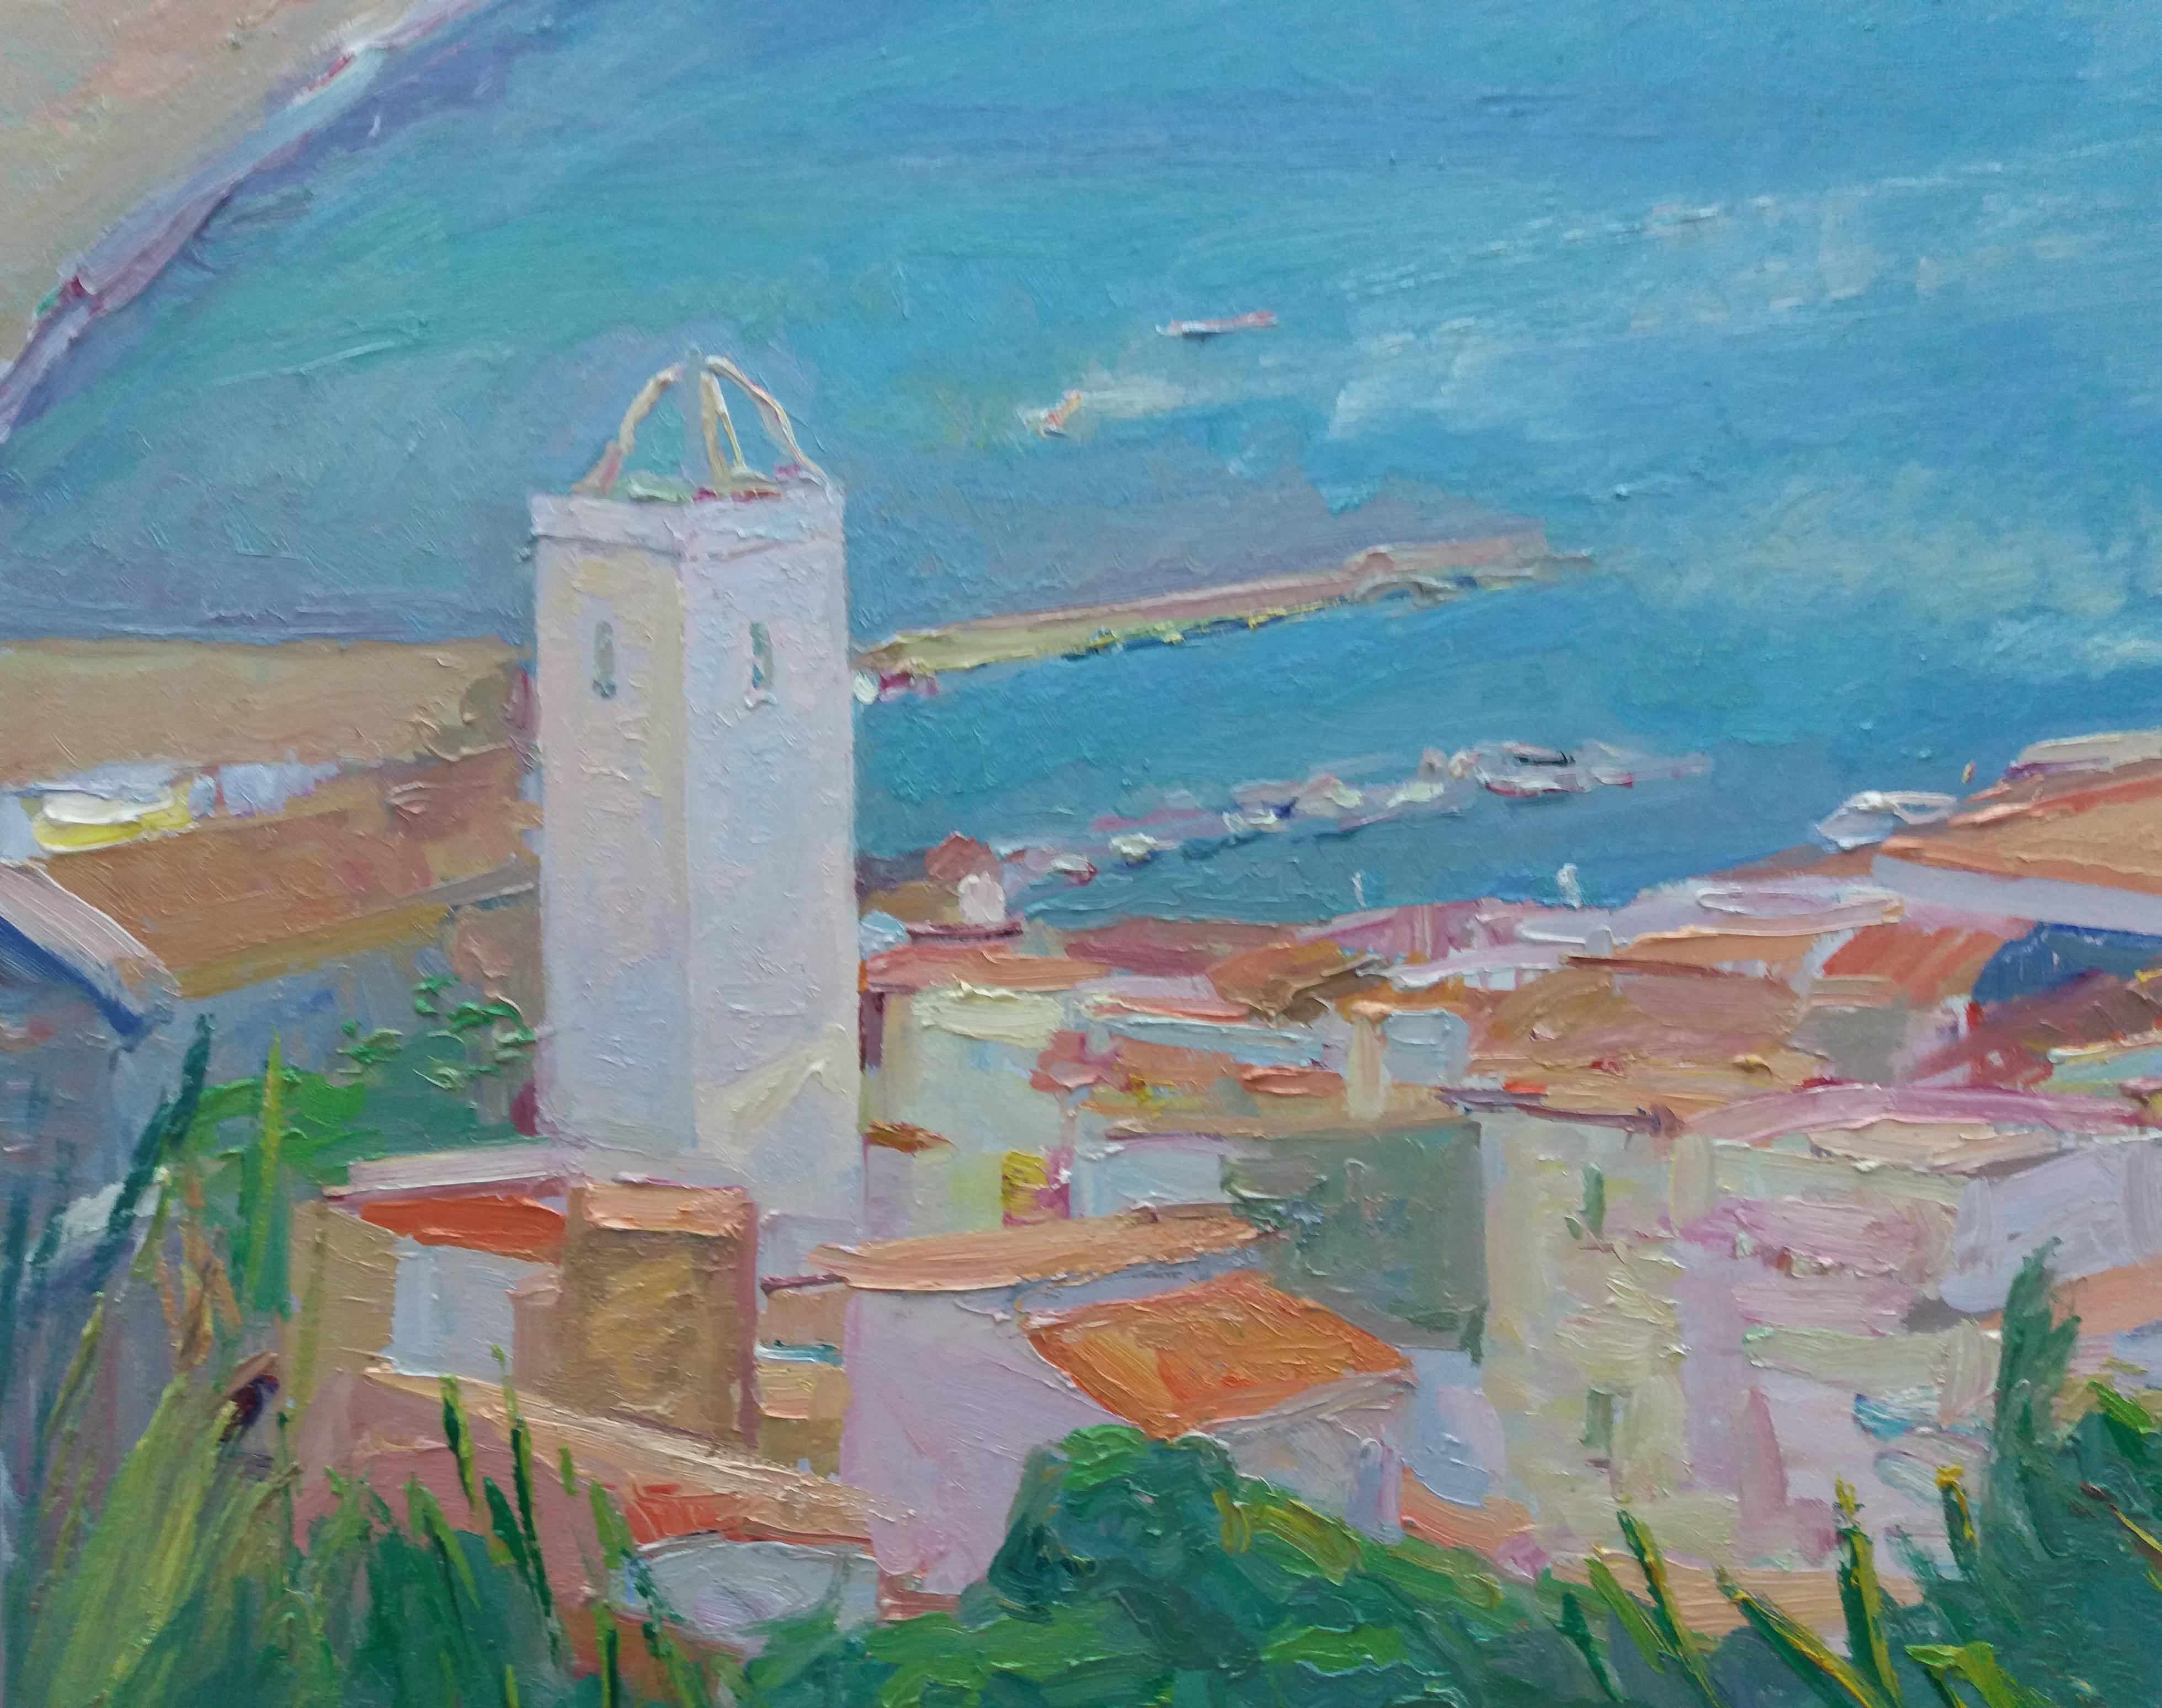 Sola puig   Town on the Coast   Bay  Beach original impressionist  - Impressionist Painting by Joan SOLA PUIG